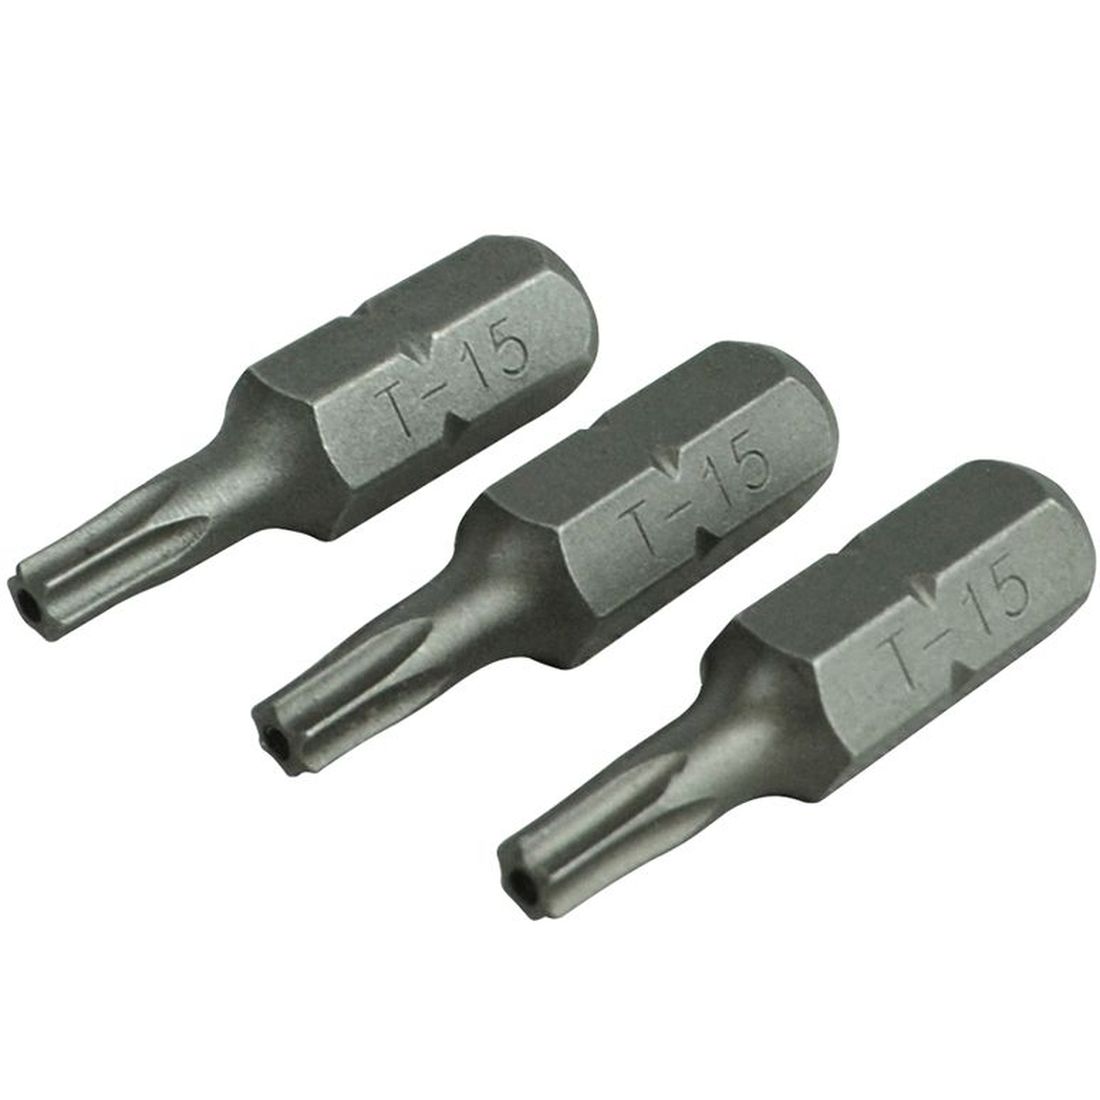 Faithfull Security S2 Grade Steel Screwdriver Bits T15S x 25mm (Pack 3)                   